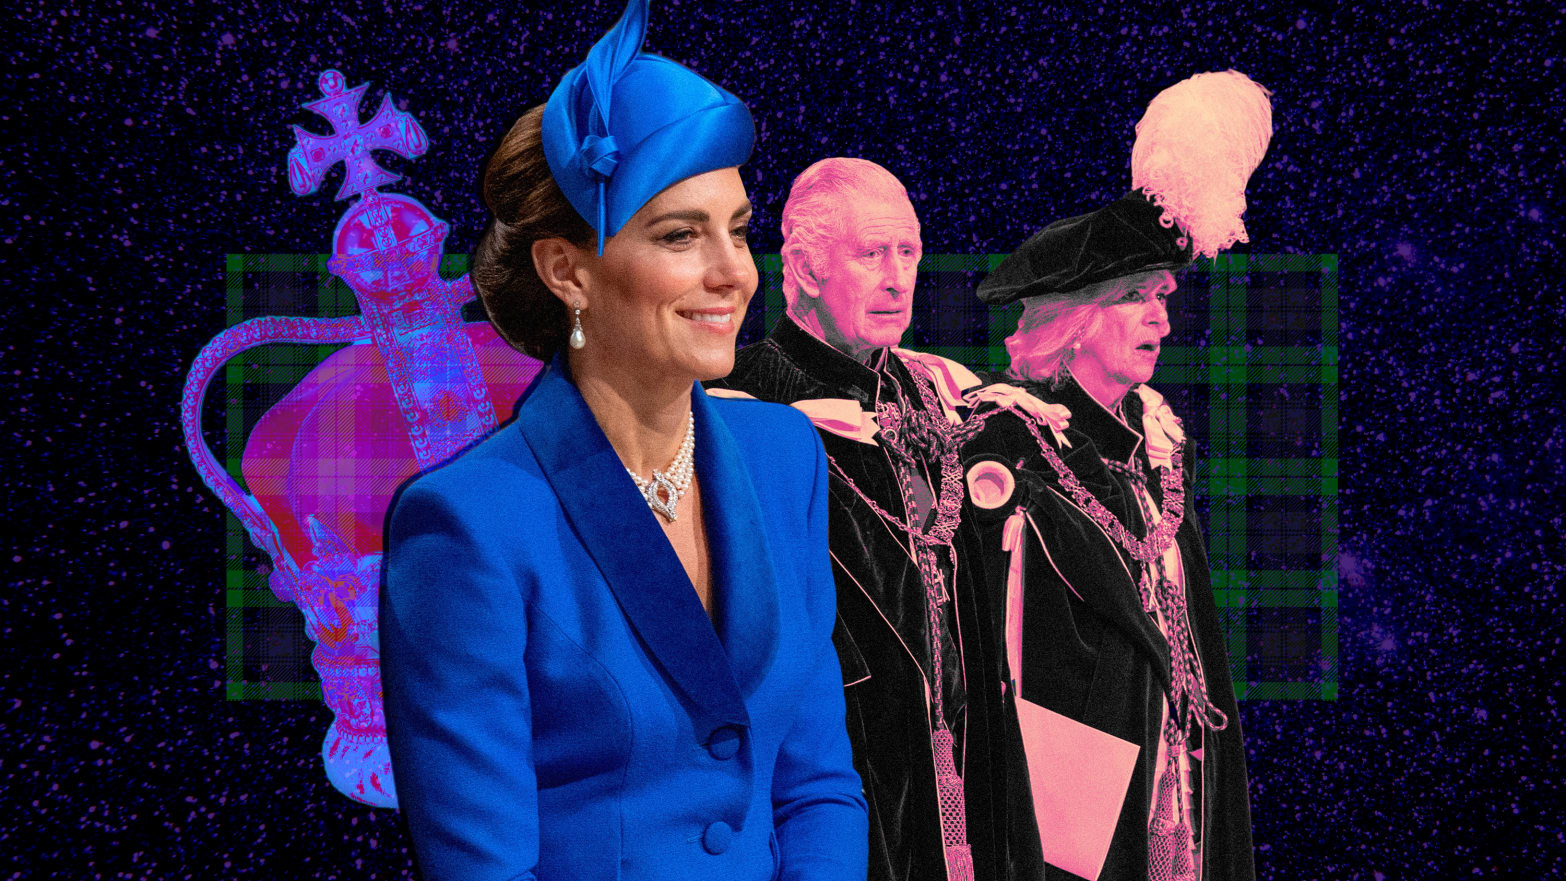 A photo composite of Kate Middleton, King Charles III and Queen Camilla at the the presentation of the Honours of Scotland.